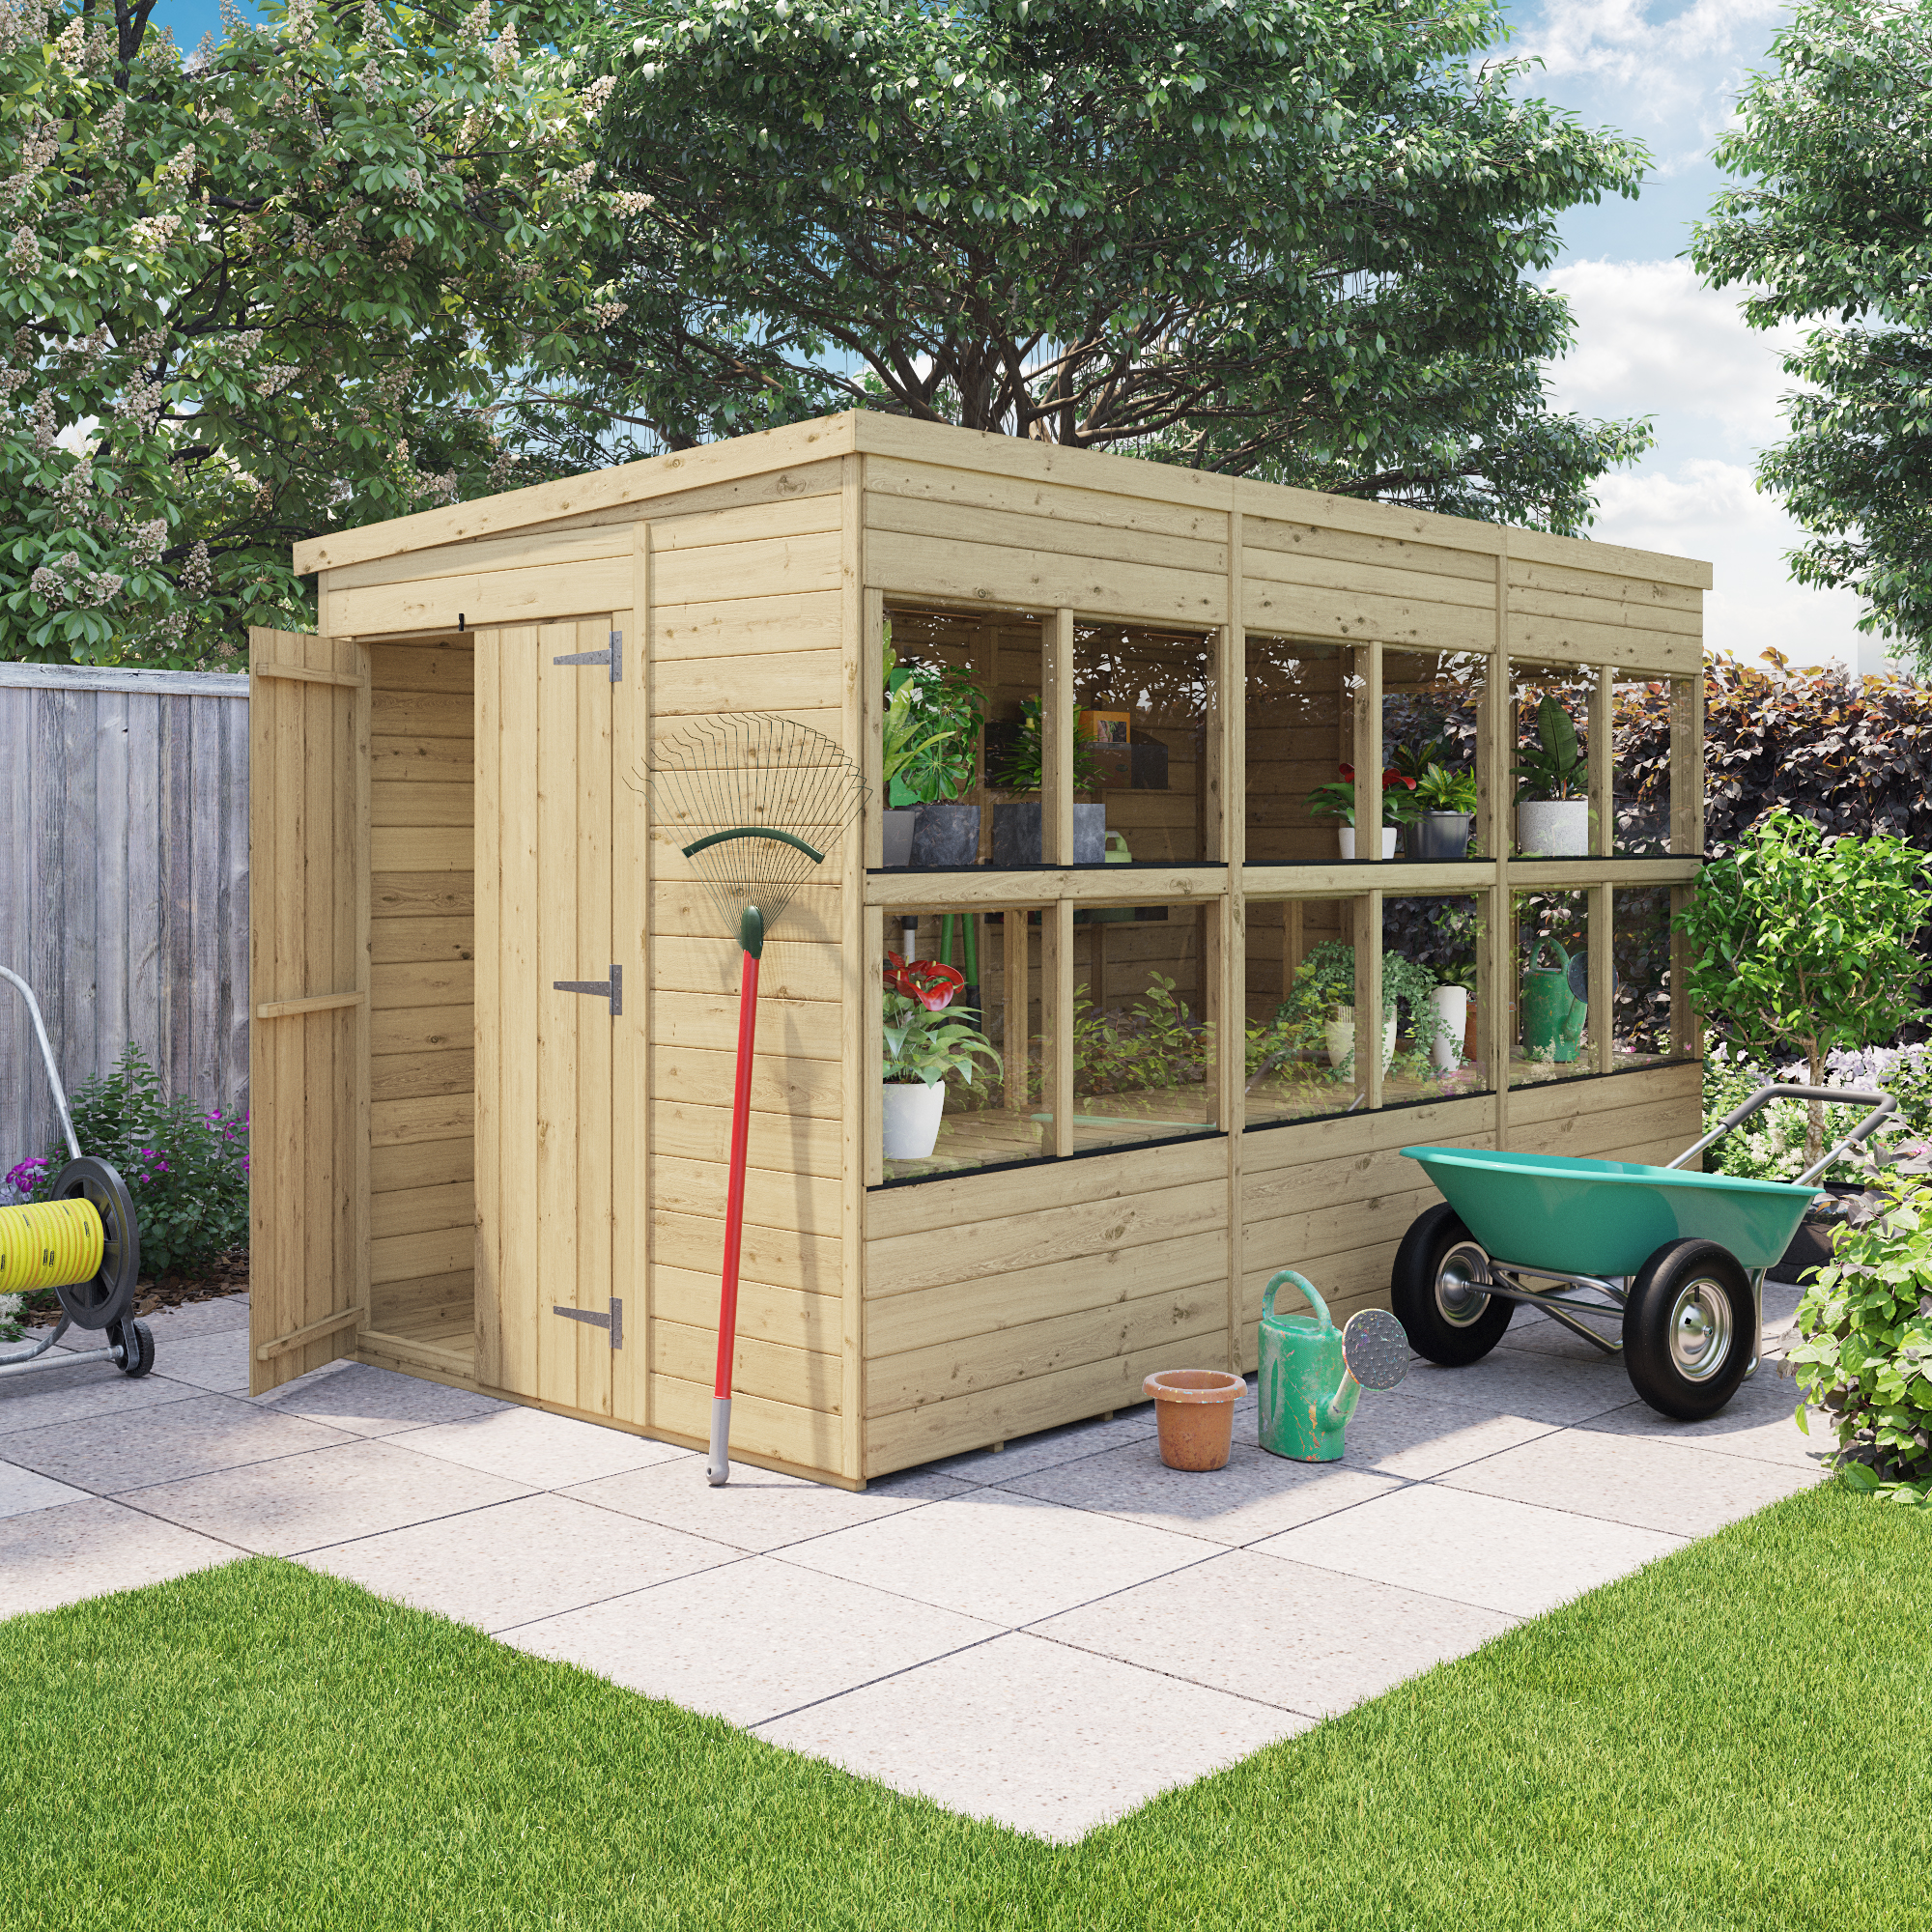 BillyOh Planthouse Tongue and Groove Pent Potting Shed - 12x6